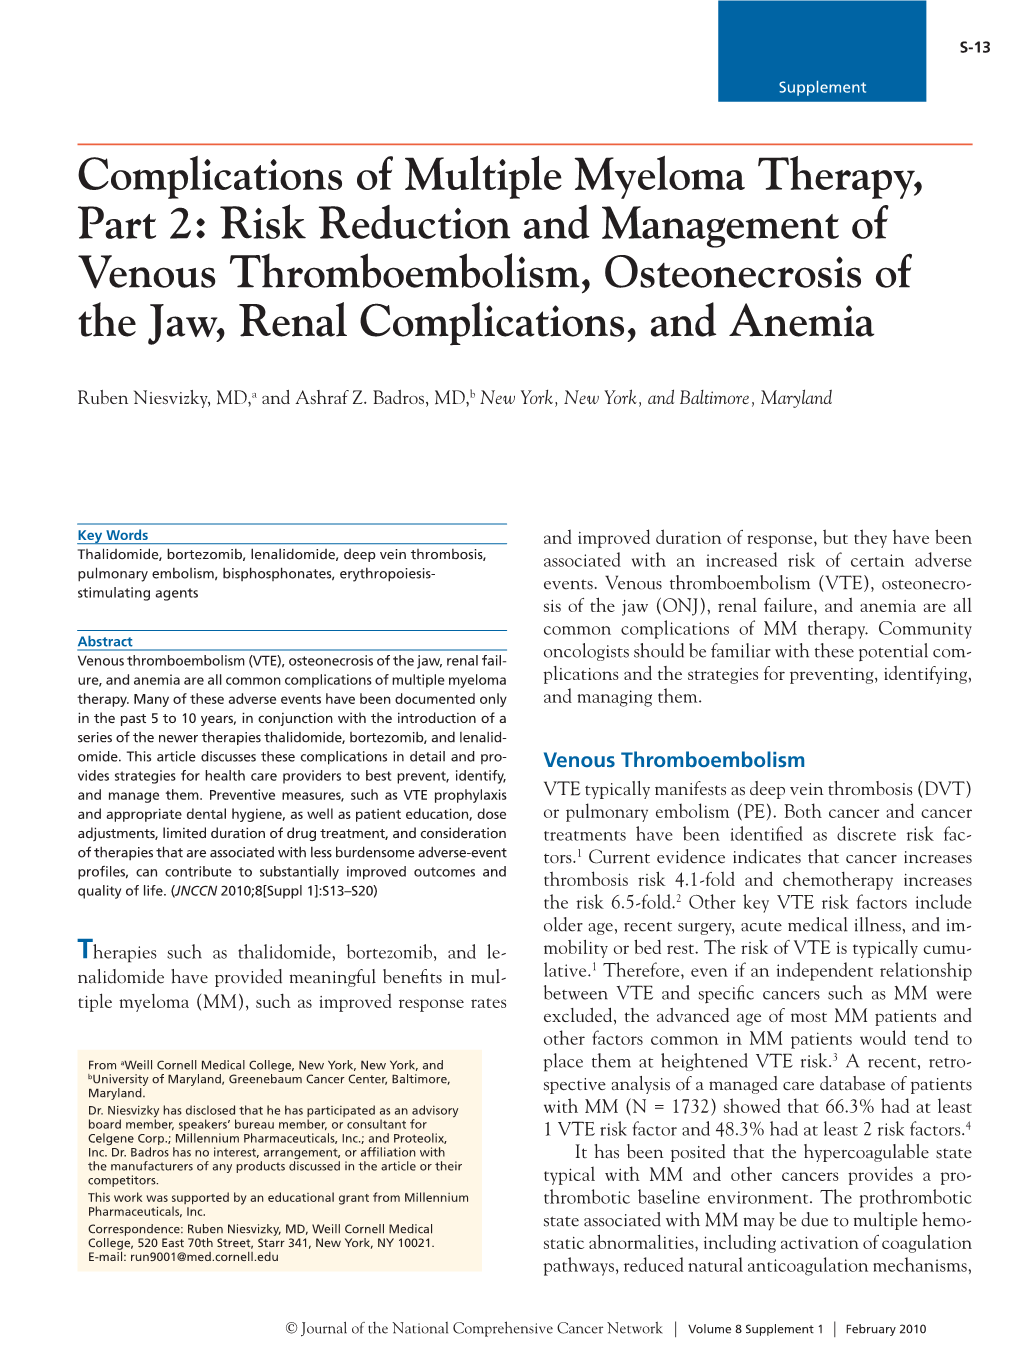 Complications of Multiple Myeloma Therapy, Part 2: Risk Reduction and Management of Venous Thromboembolism, Osteonecrosis of the Jaw, Renal Complications, and Anemia